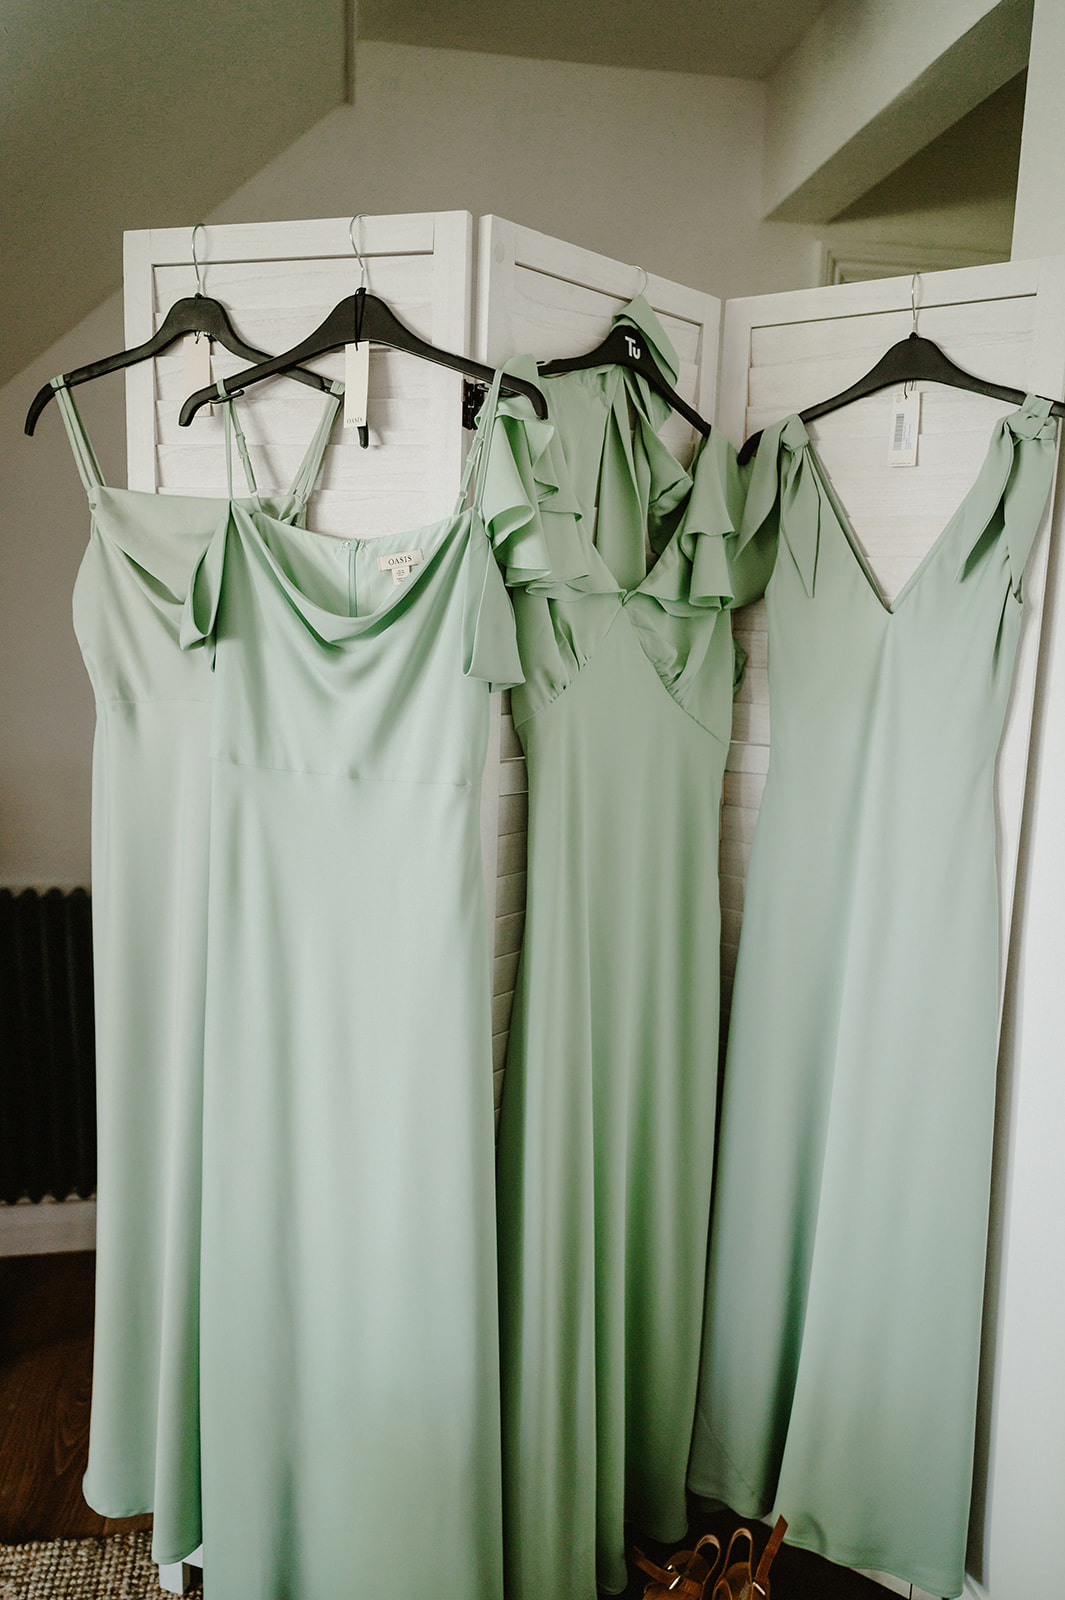 bridesmaids dresses hanging up the morning of the wedding